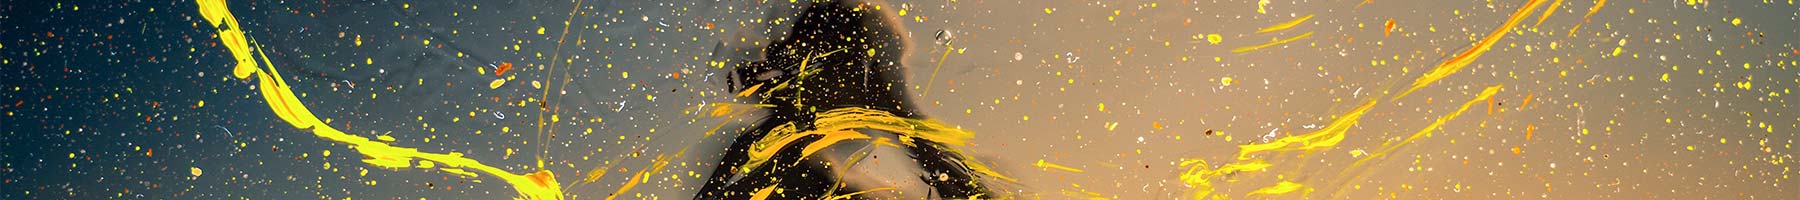 blurry photo of a woman splattered with yellow paint